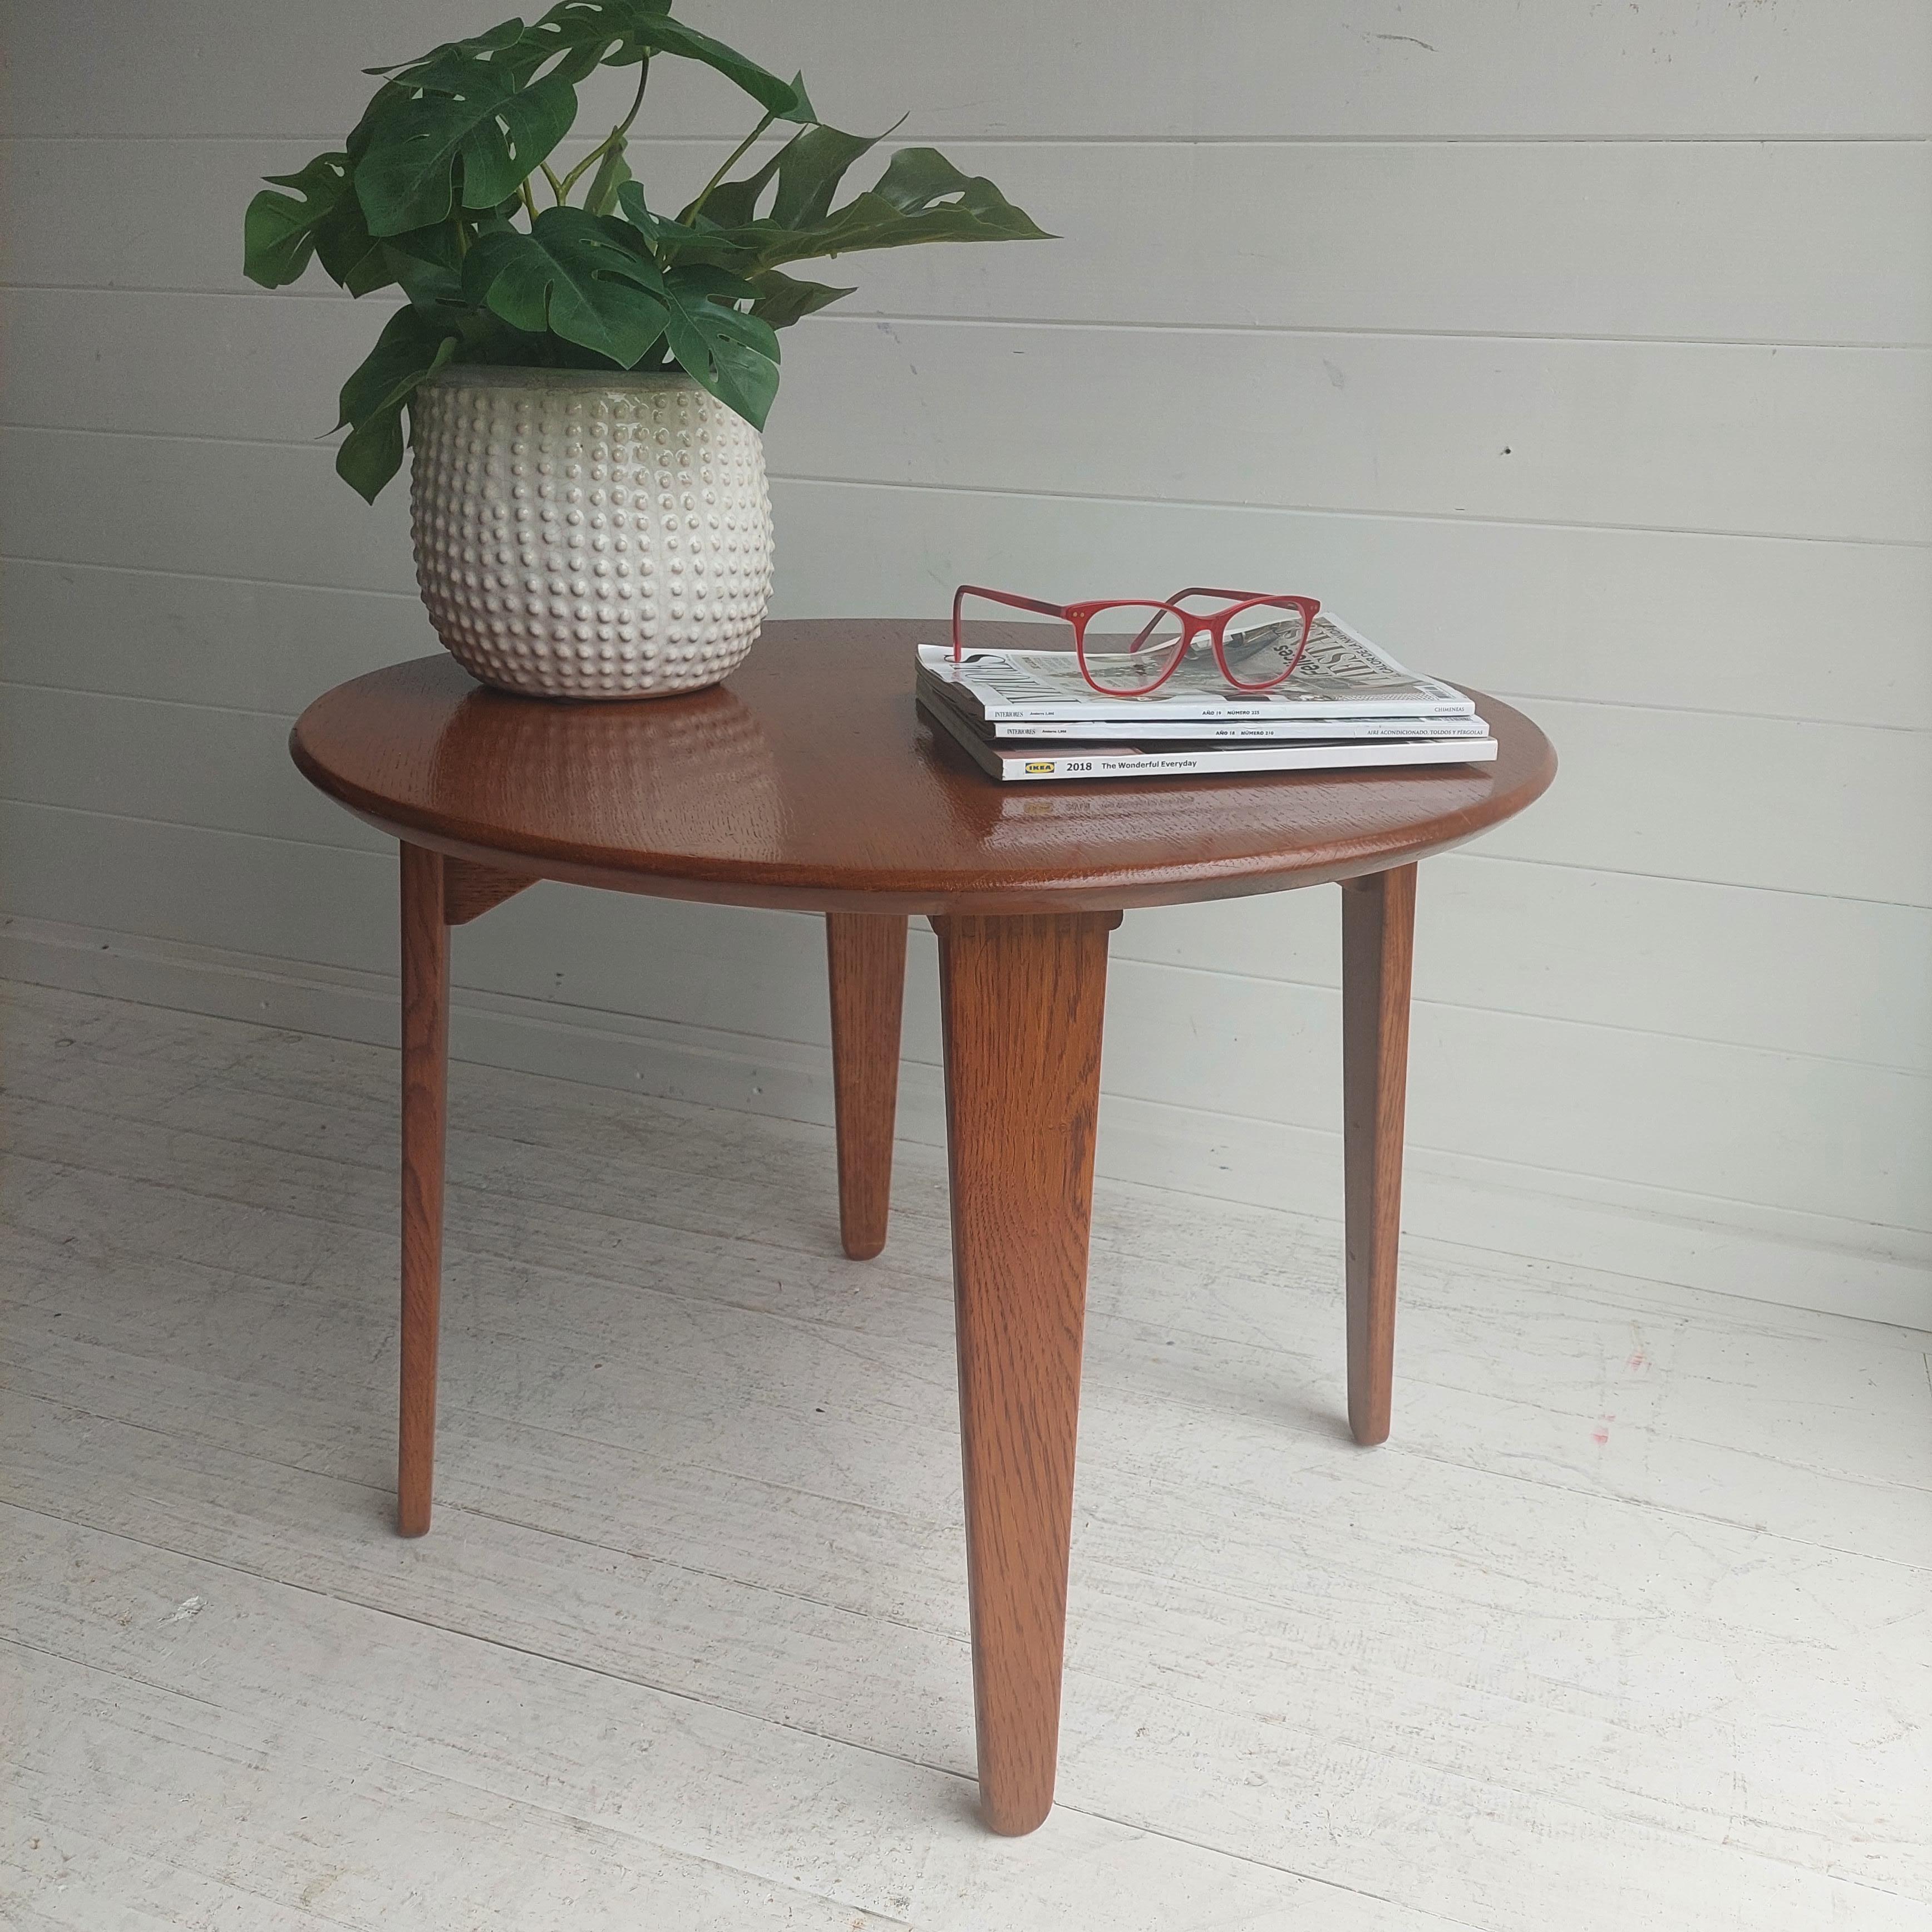 50s table